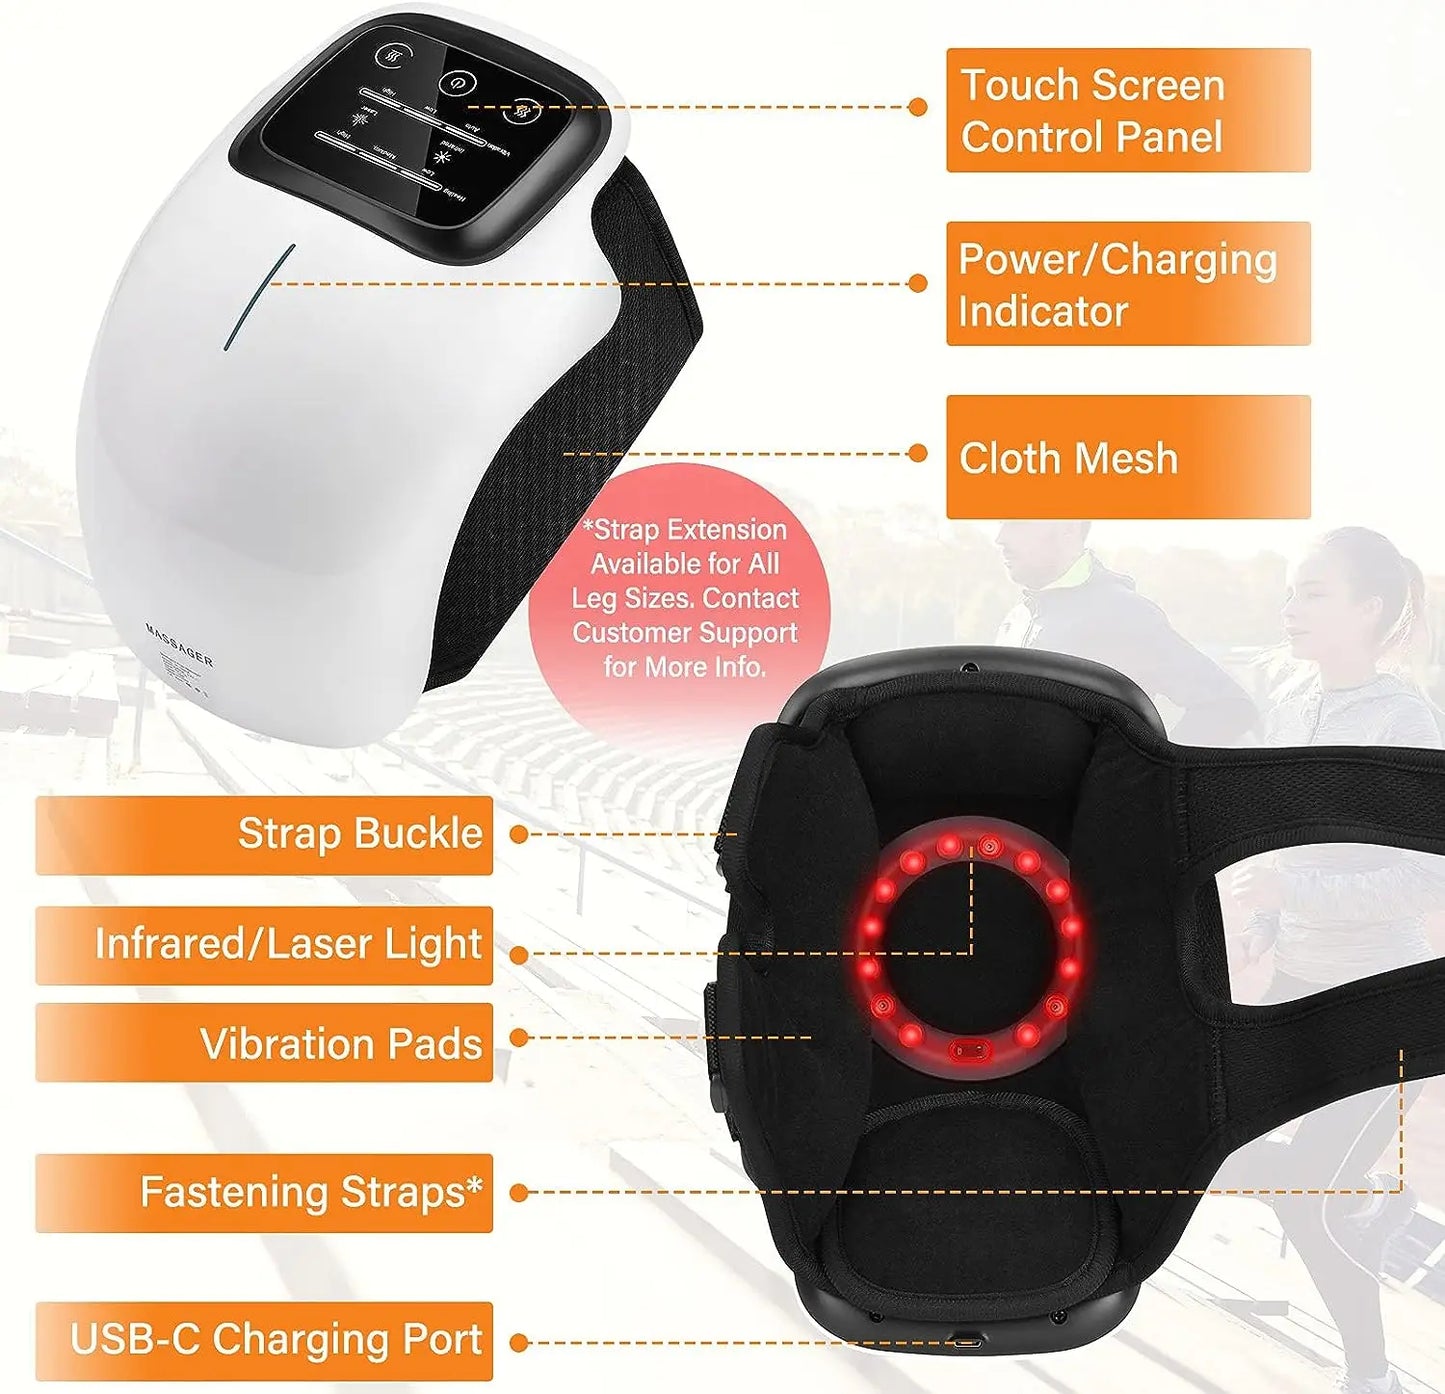 Non-invasive knee pain relief with 3-in-1 Knee Massager - combines red light therapy, heat therapy, and massage therapy for optimal results